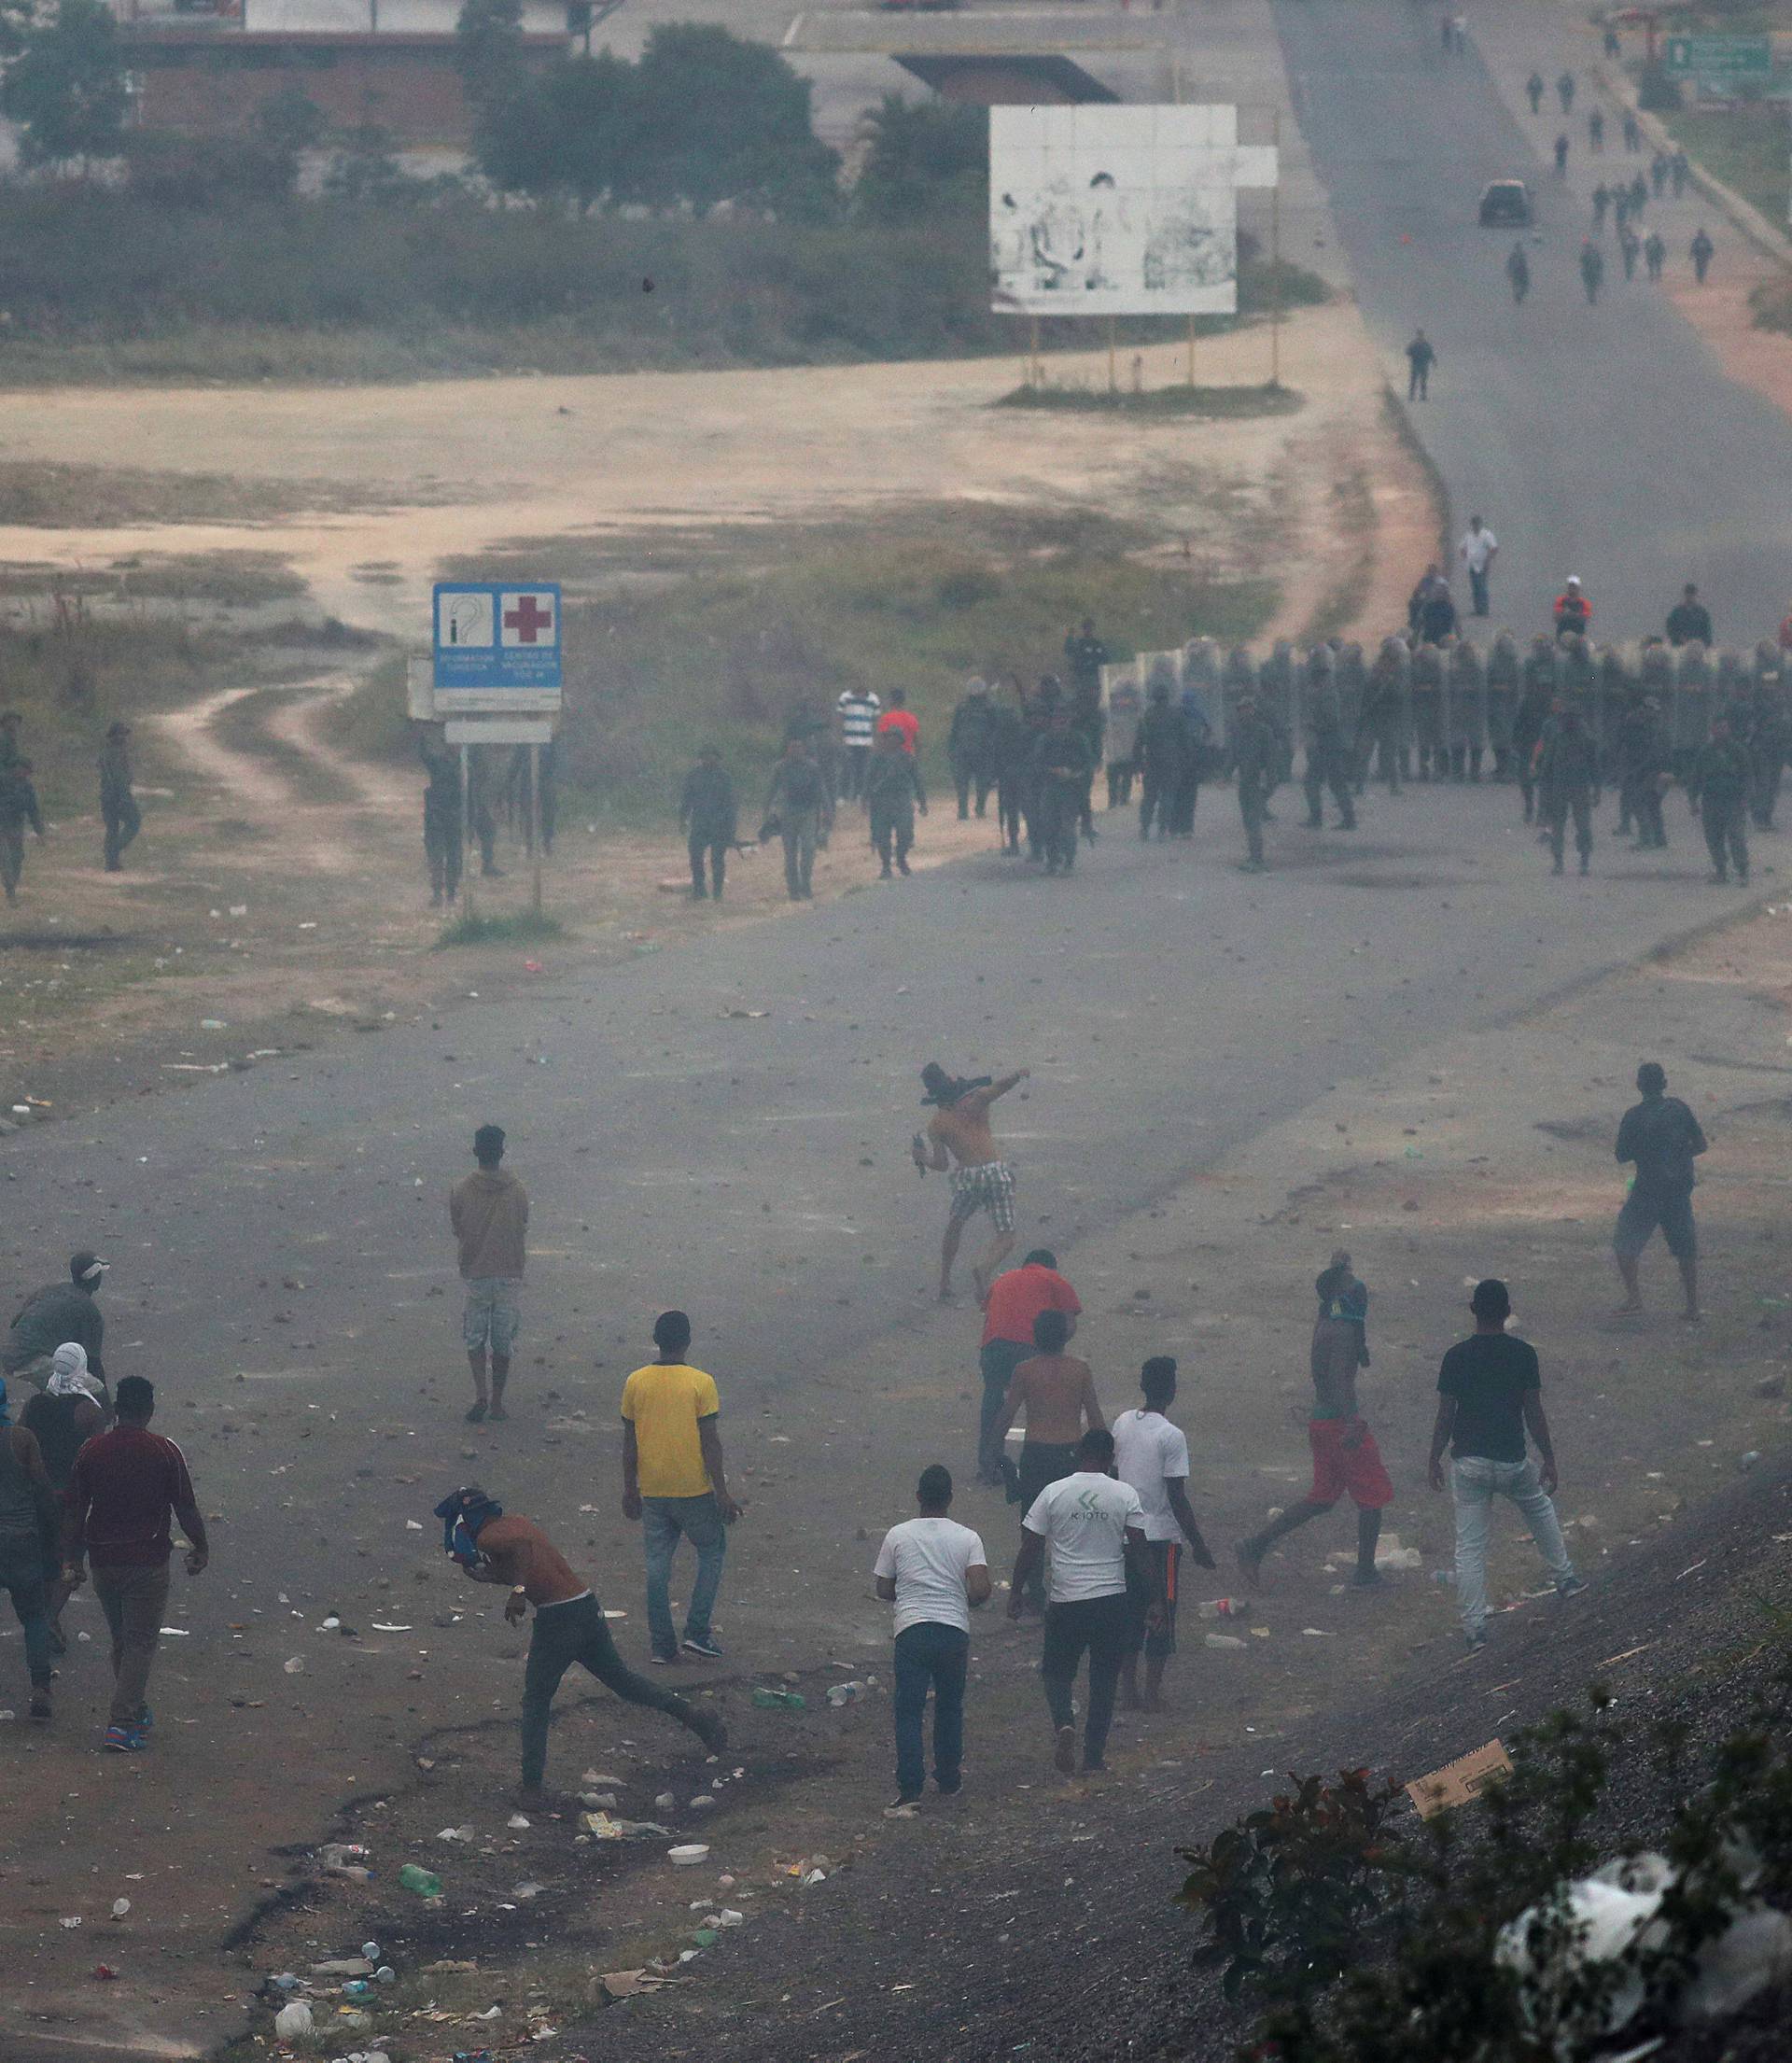 Venezuelan soldiers clash with protesters along the border between Venezuela and Brazil in Pacaraima